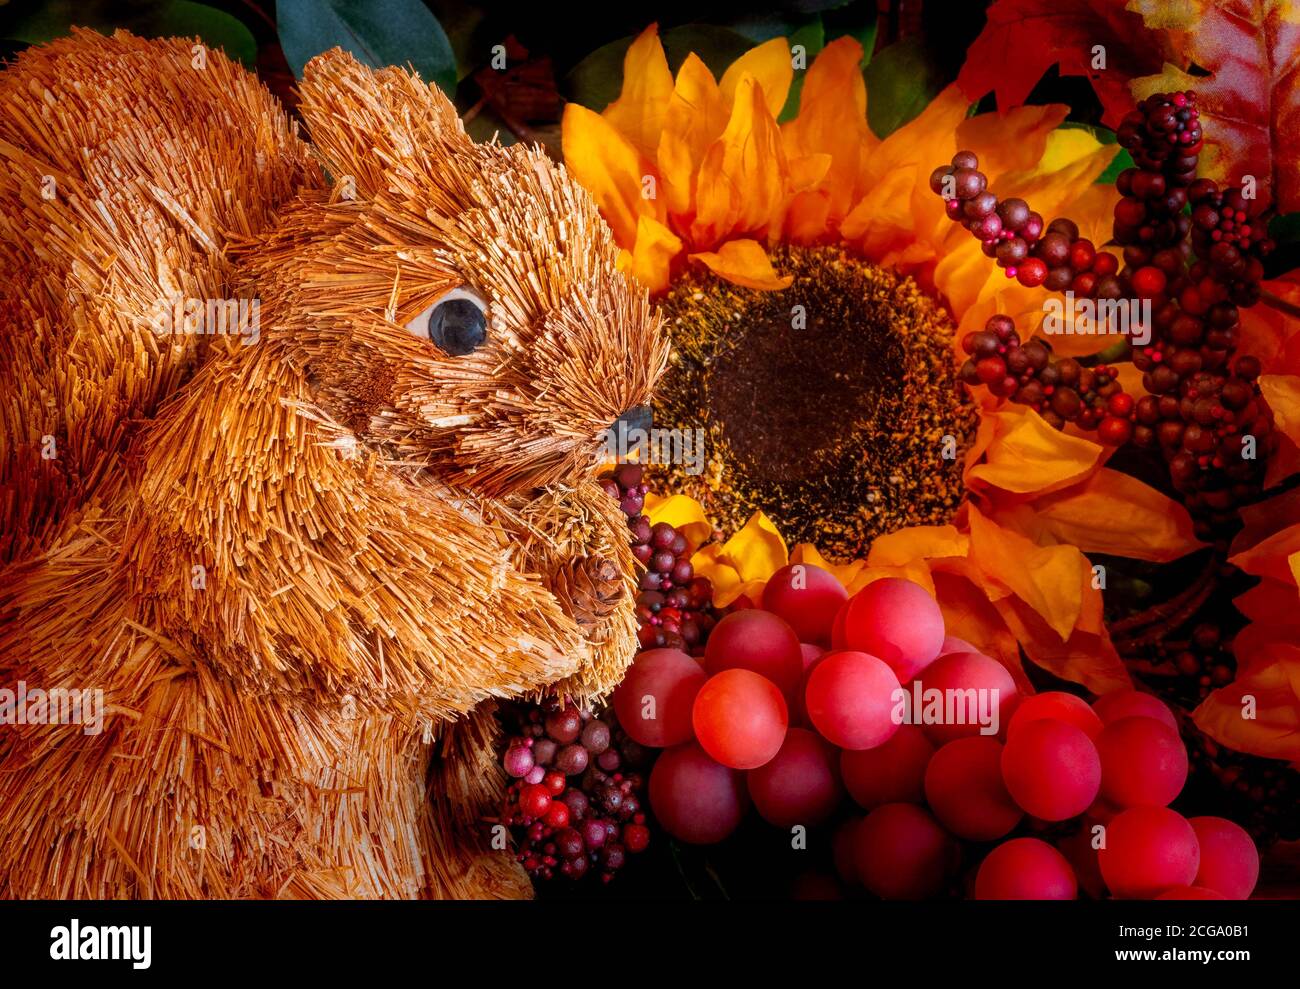 Close up of a squirrel surrounded by  sunflowers, grapes, berries and foliage for the autumn celebrations. Stock Photo